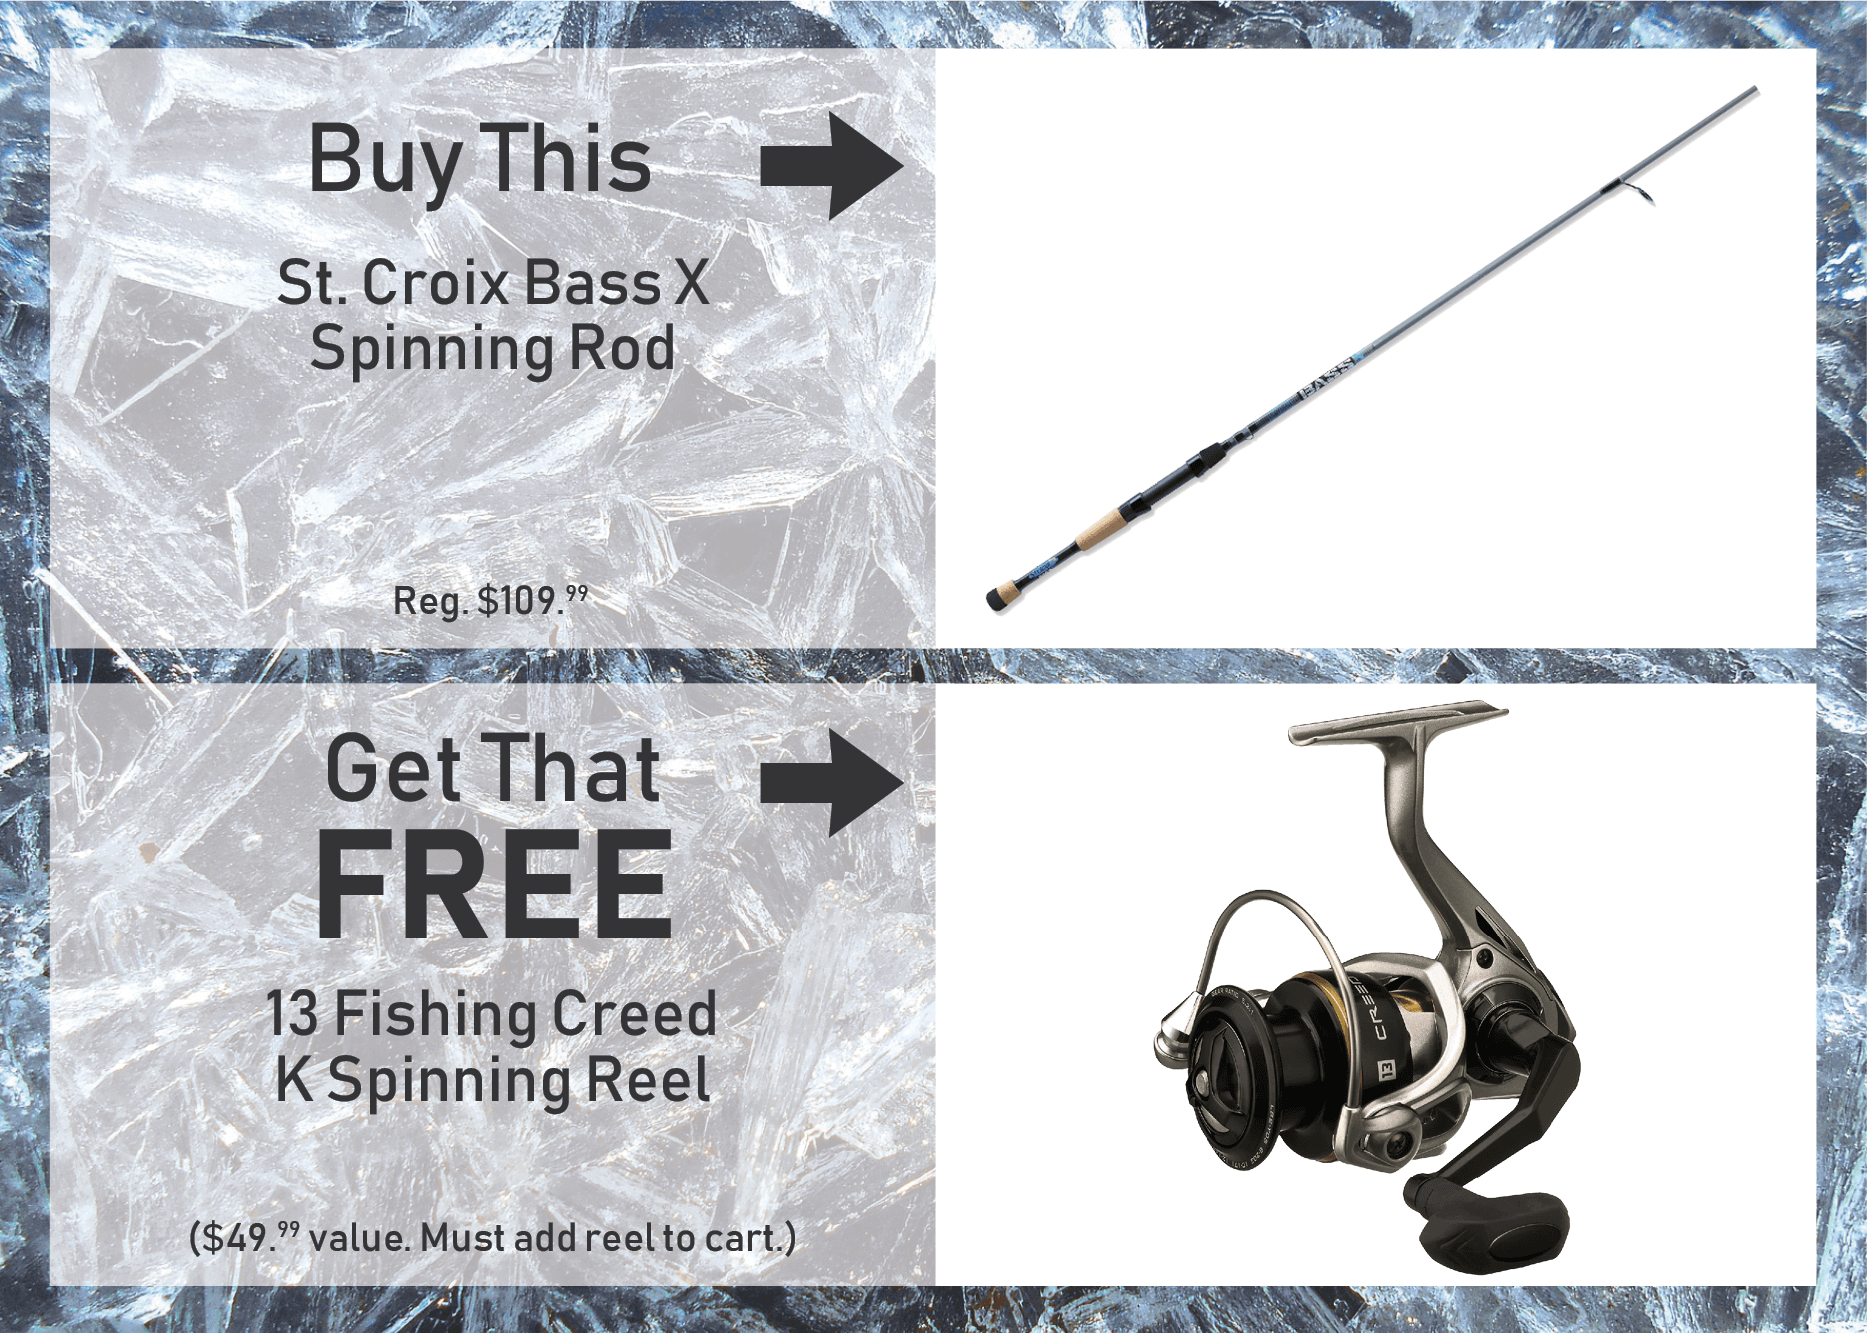 Buy a St. Croix Bass X Spinning Rod & Get a FREE 13 Fishing Creed K Spinning Reel! 